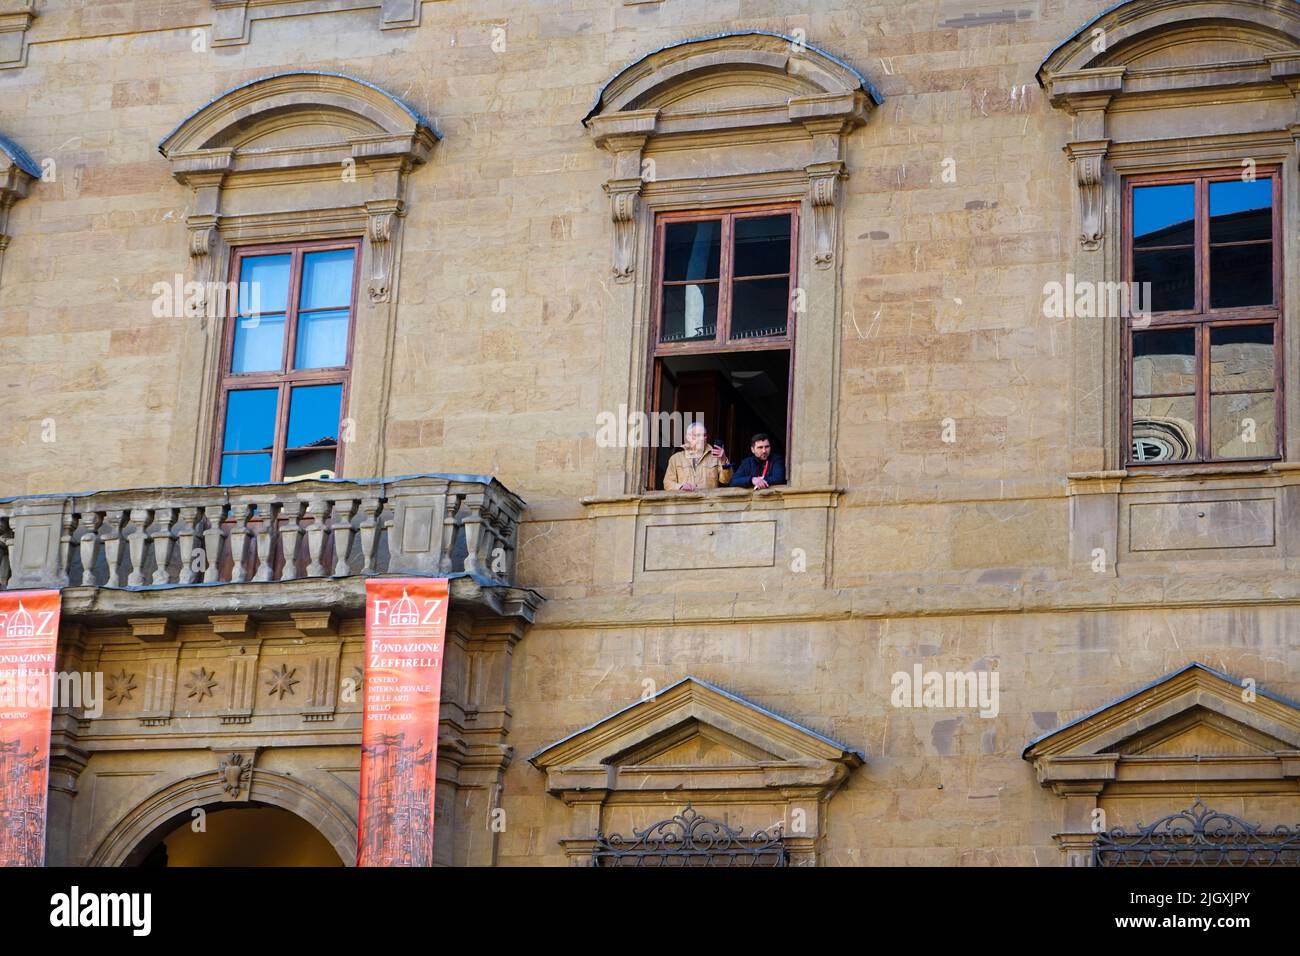 Two men look out of a window of the Franco Zeffirelli Foundation building at a Palm Sunday religious processional, Florence, Italy. Stock Photo